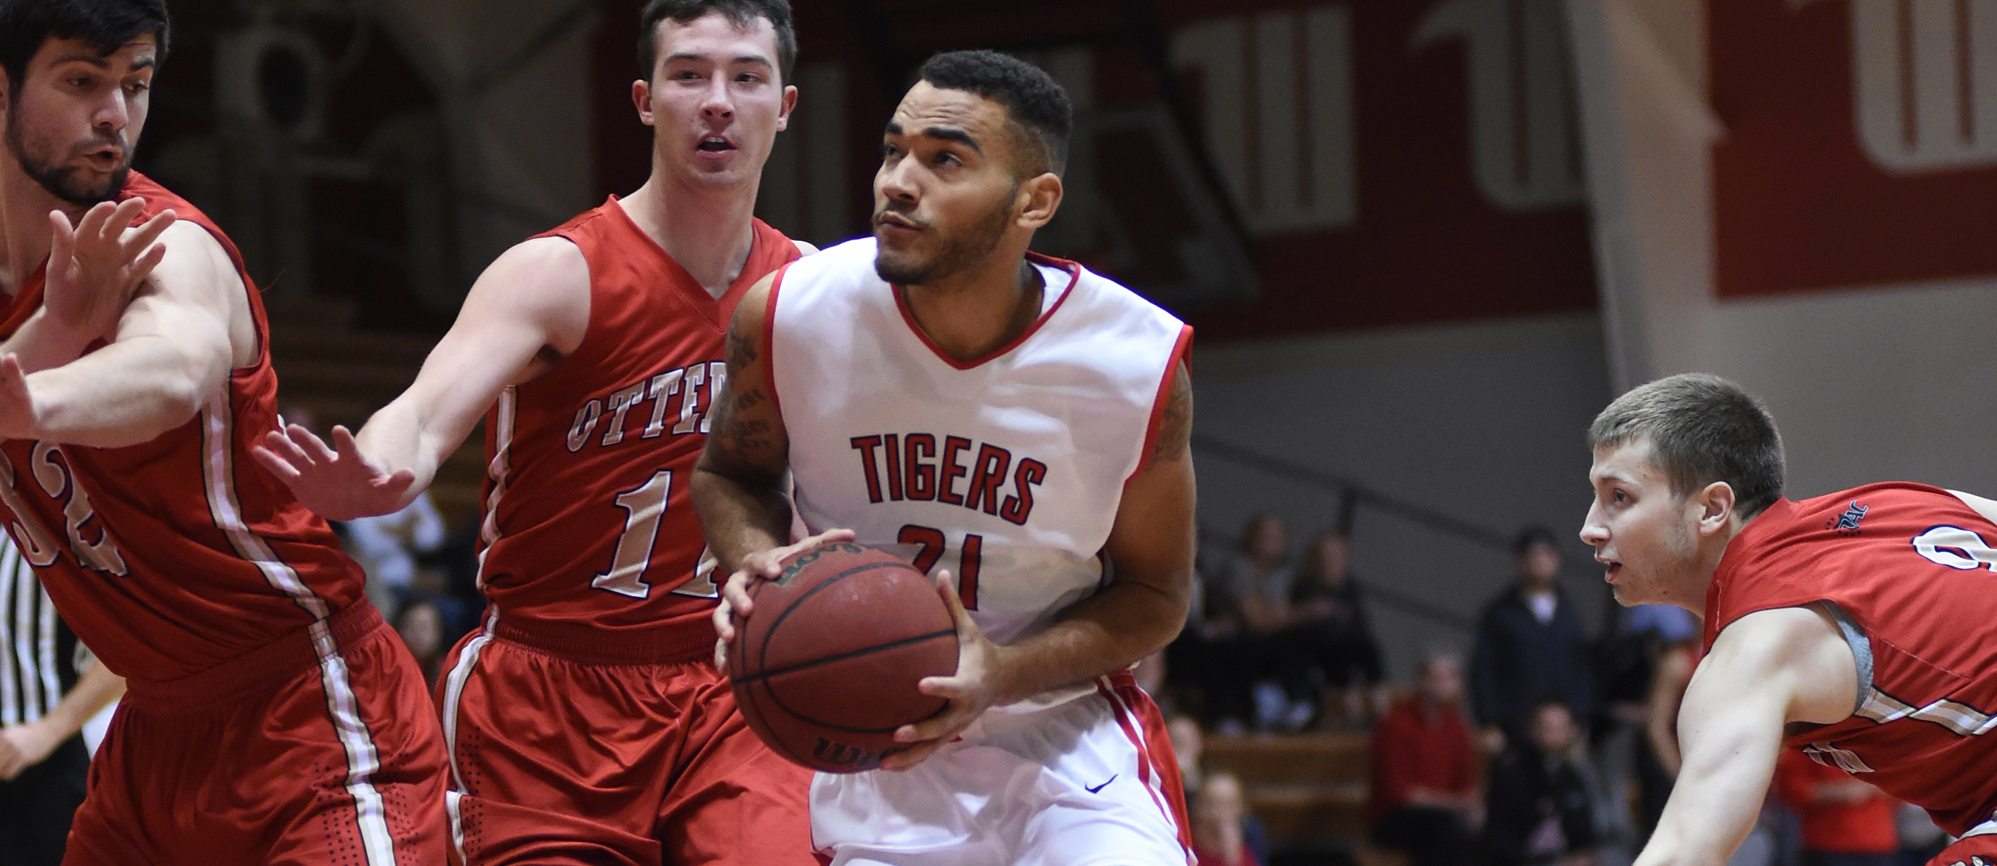 Men's Basketball Falls in Overtime to Archrival Wooster, 99-86